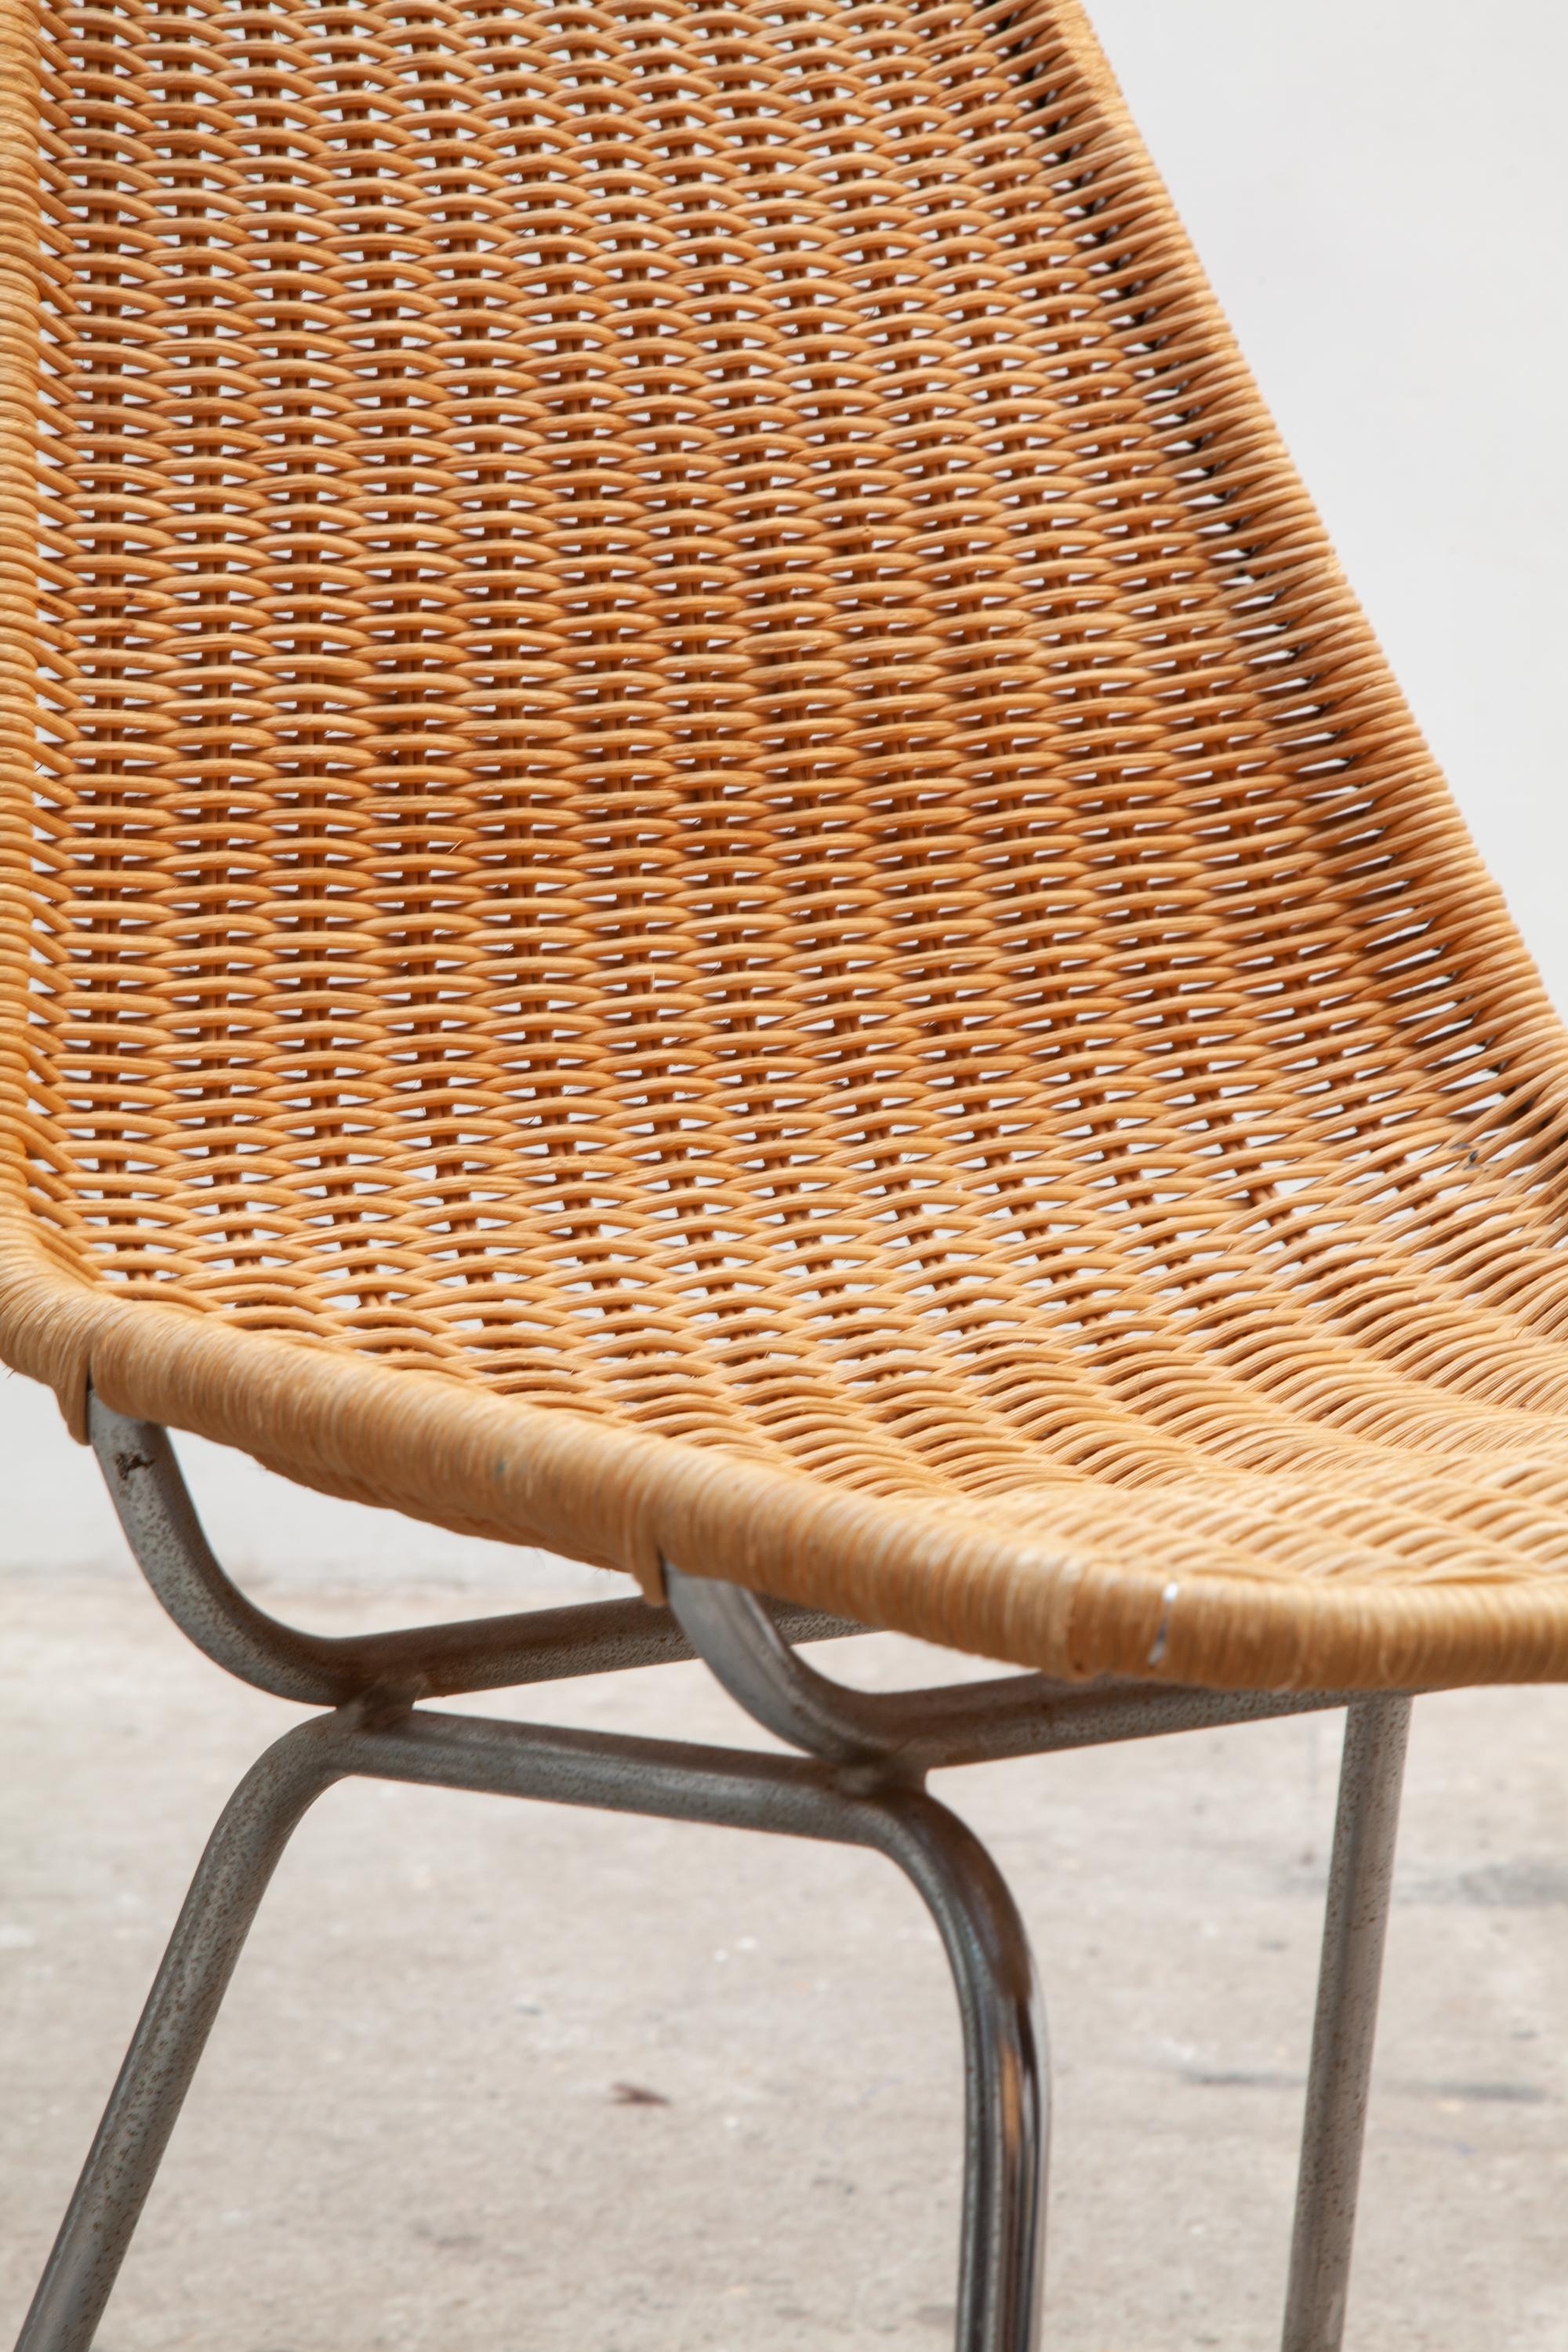 Hand-Knotted Set of Four Wicker Shell Chairs and Metal Crome Frame by Dirk Van Sliedrecht